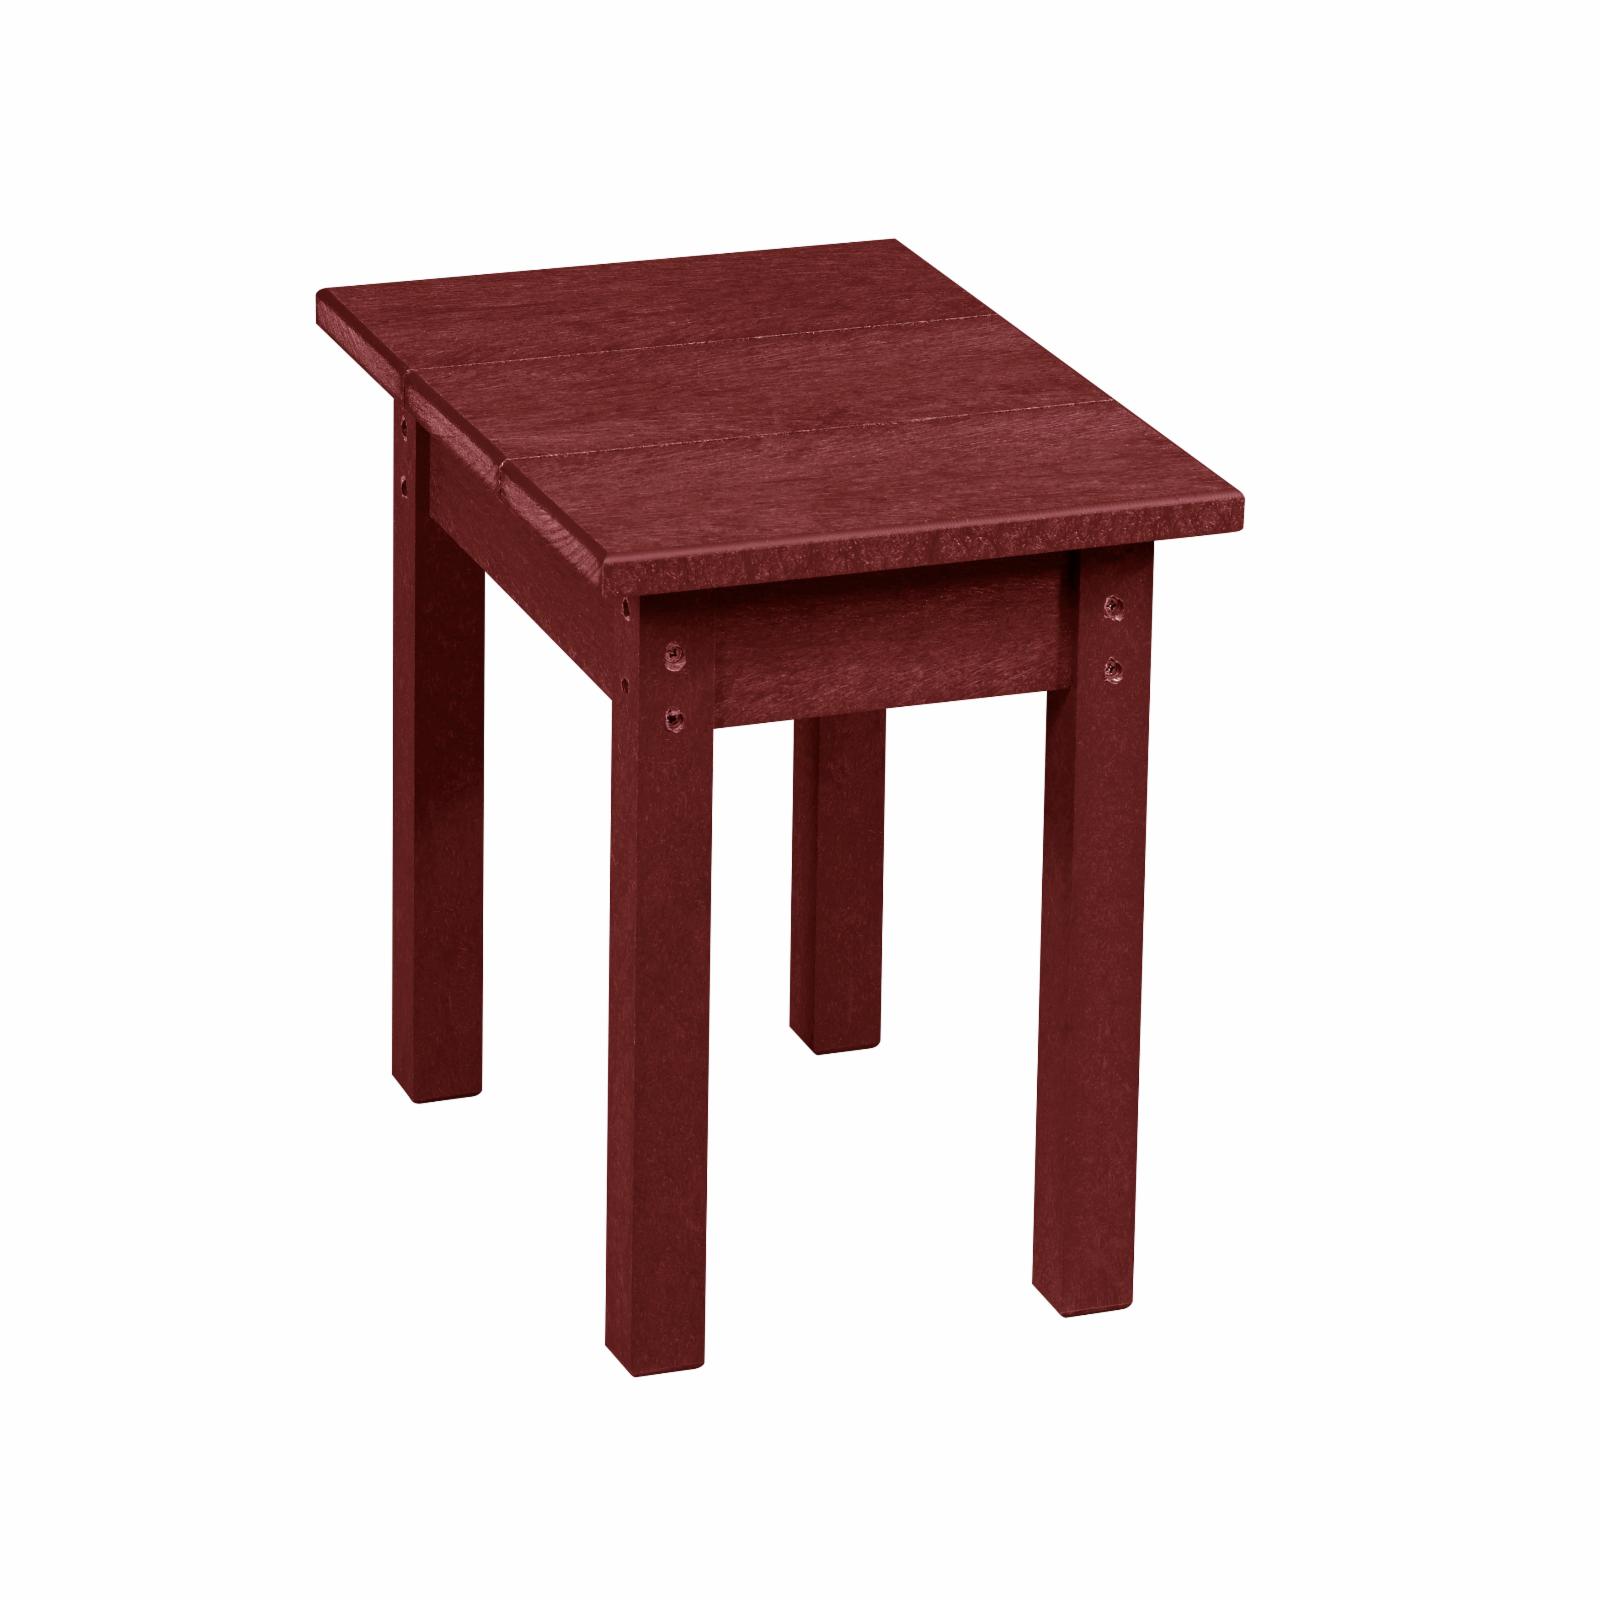 HN Outdoor Logan Recycled Plastic Small Outdoor Side Table - image 3 of 11